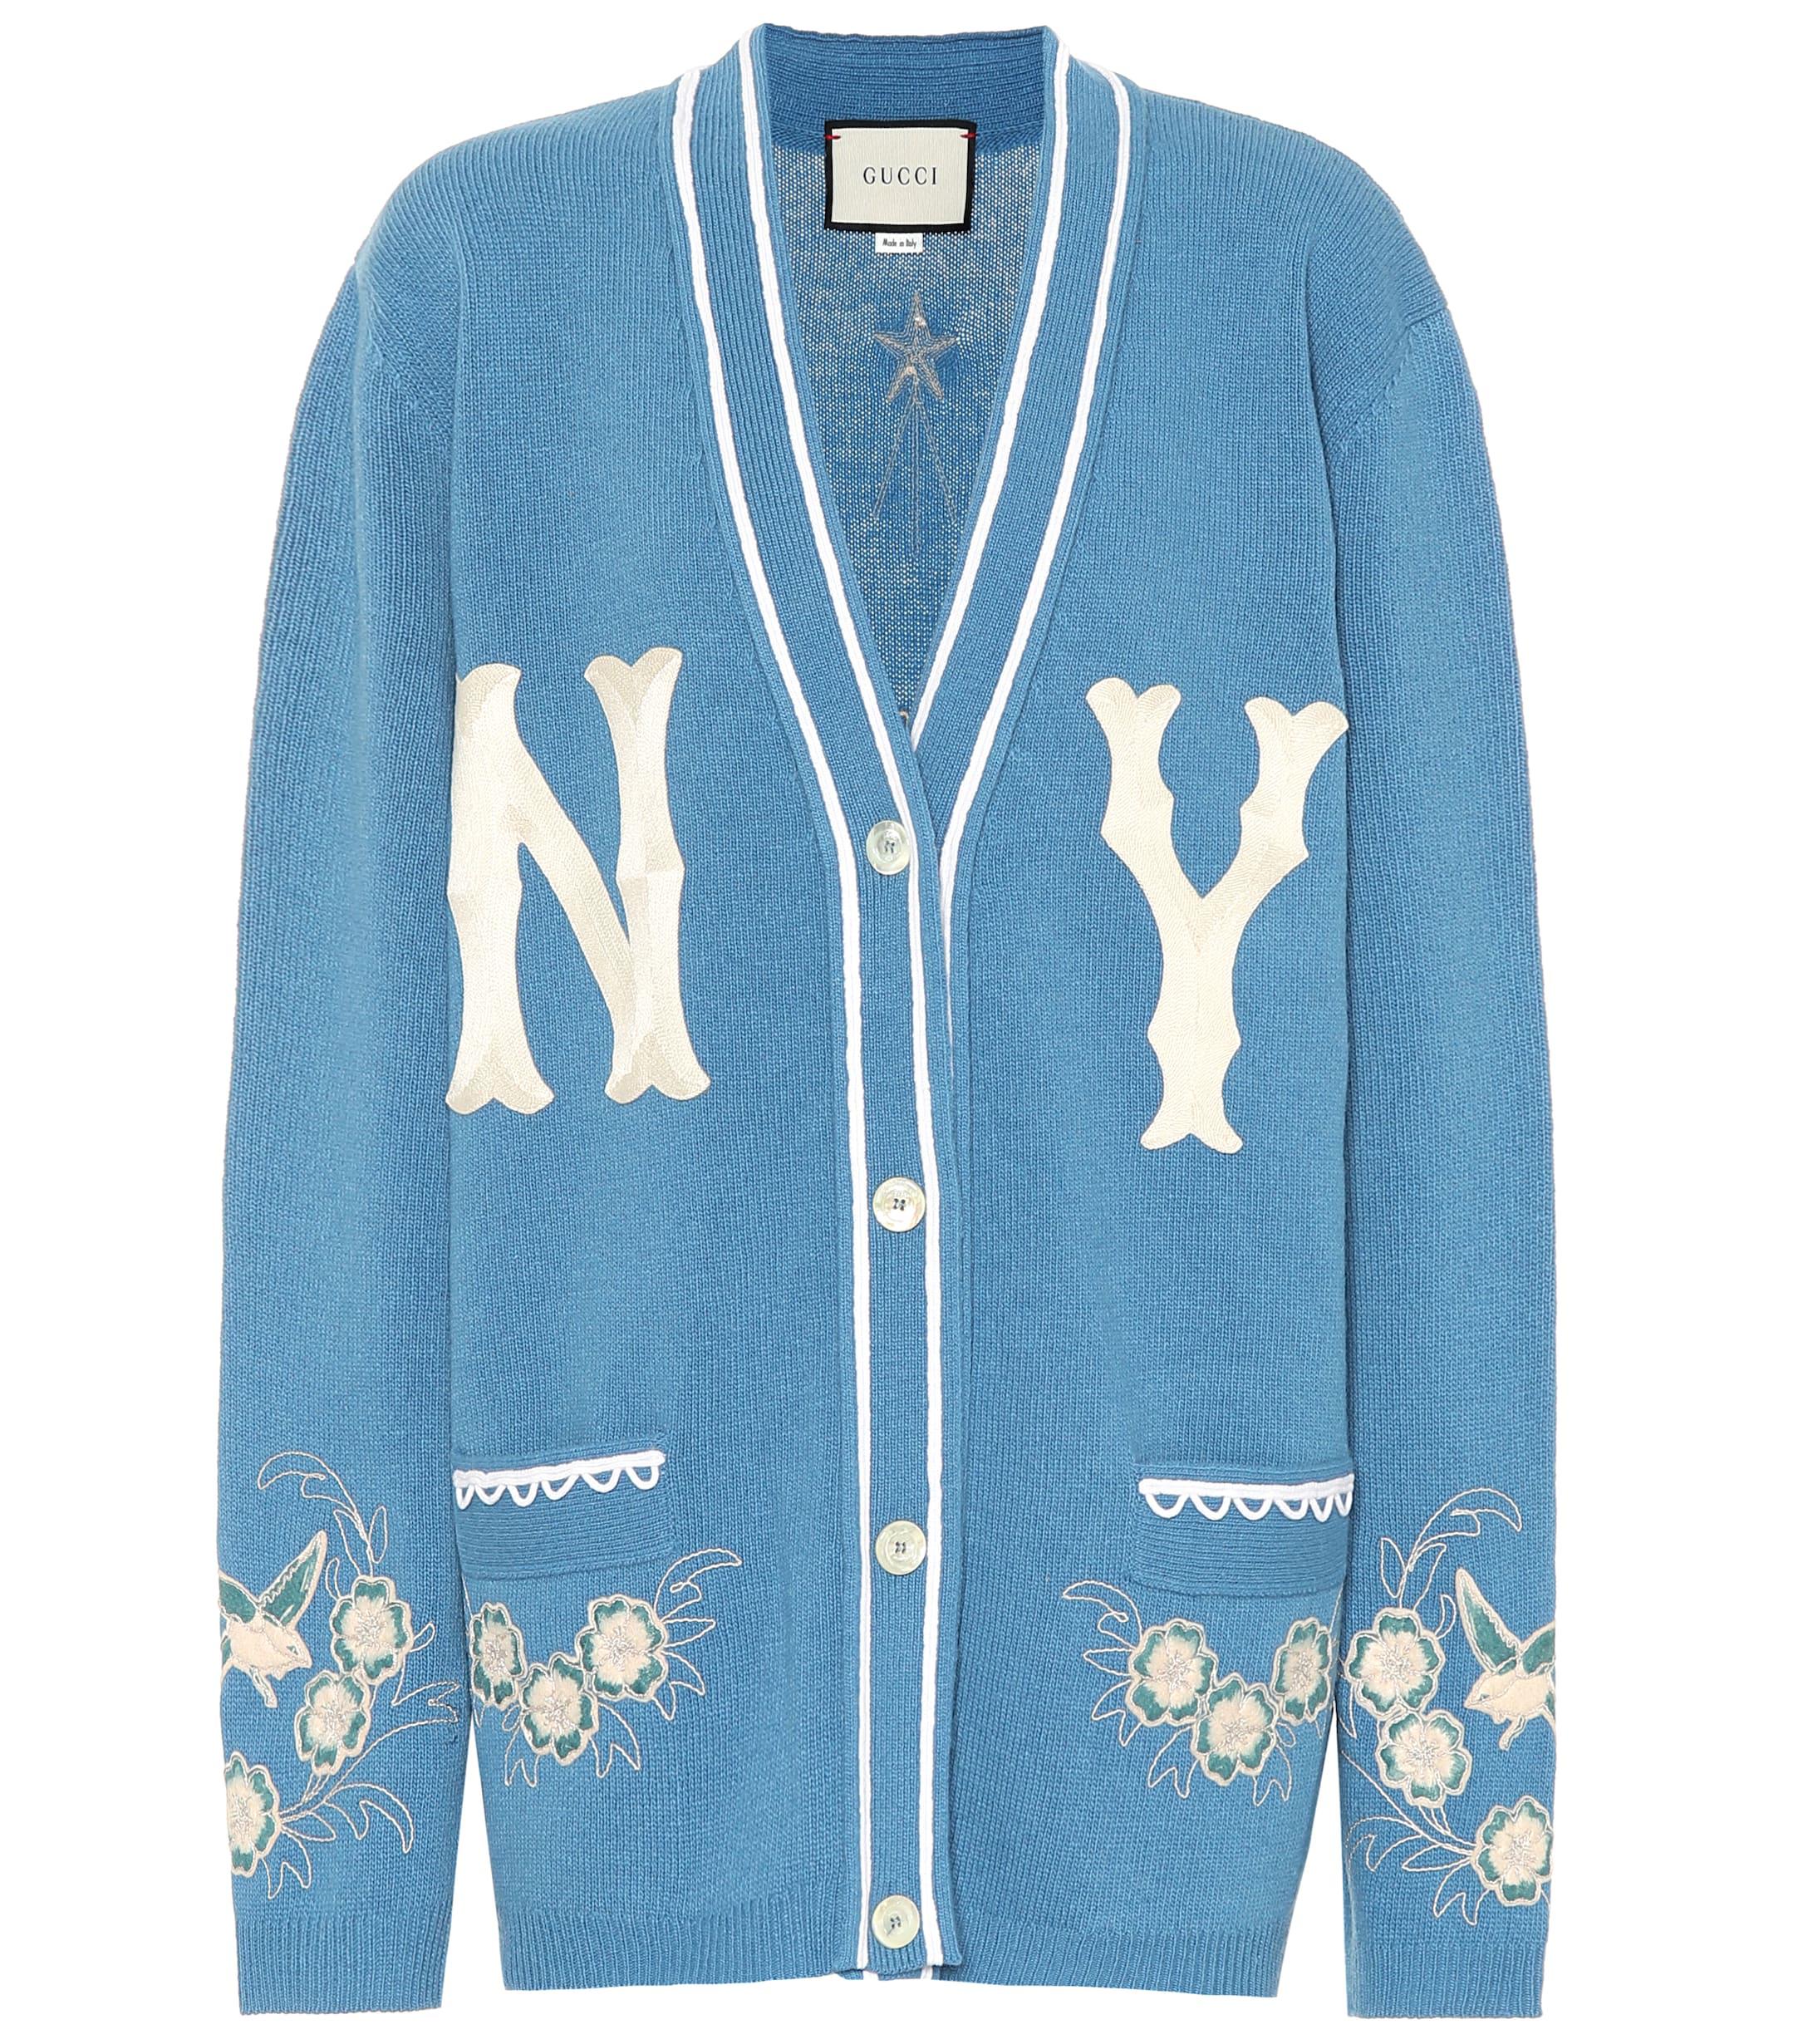 Gucci Ny Yankees Patch Embroidered Wool Cardigan in Blue - Lyst